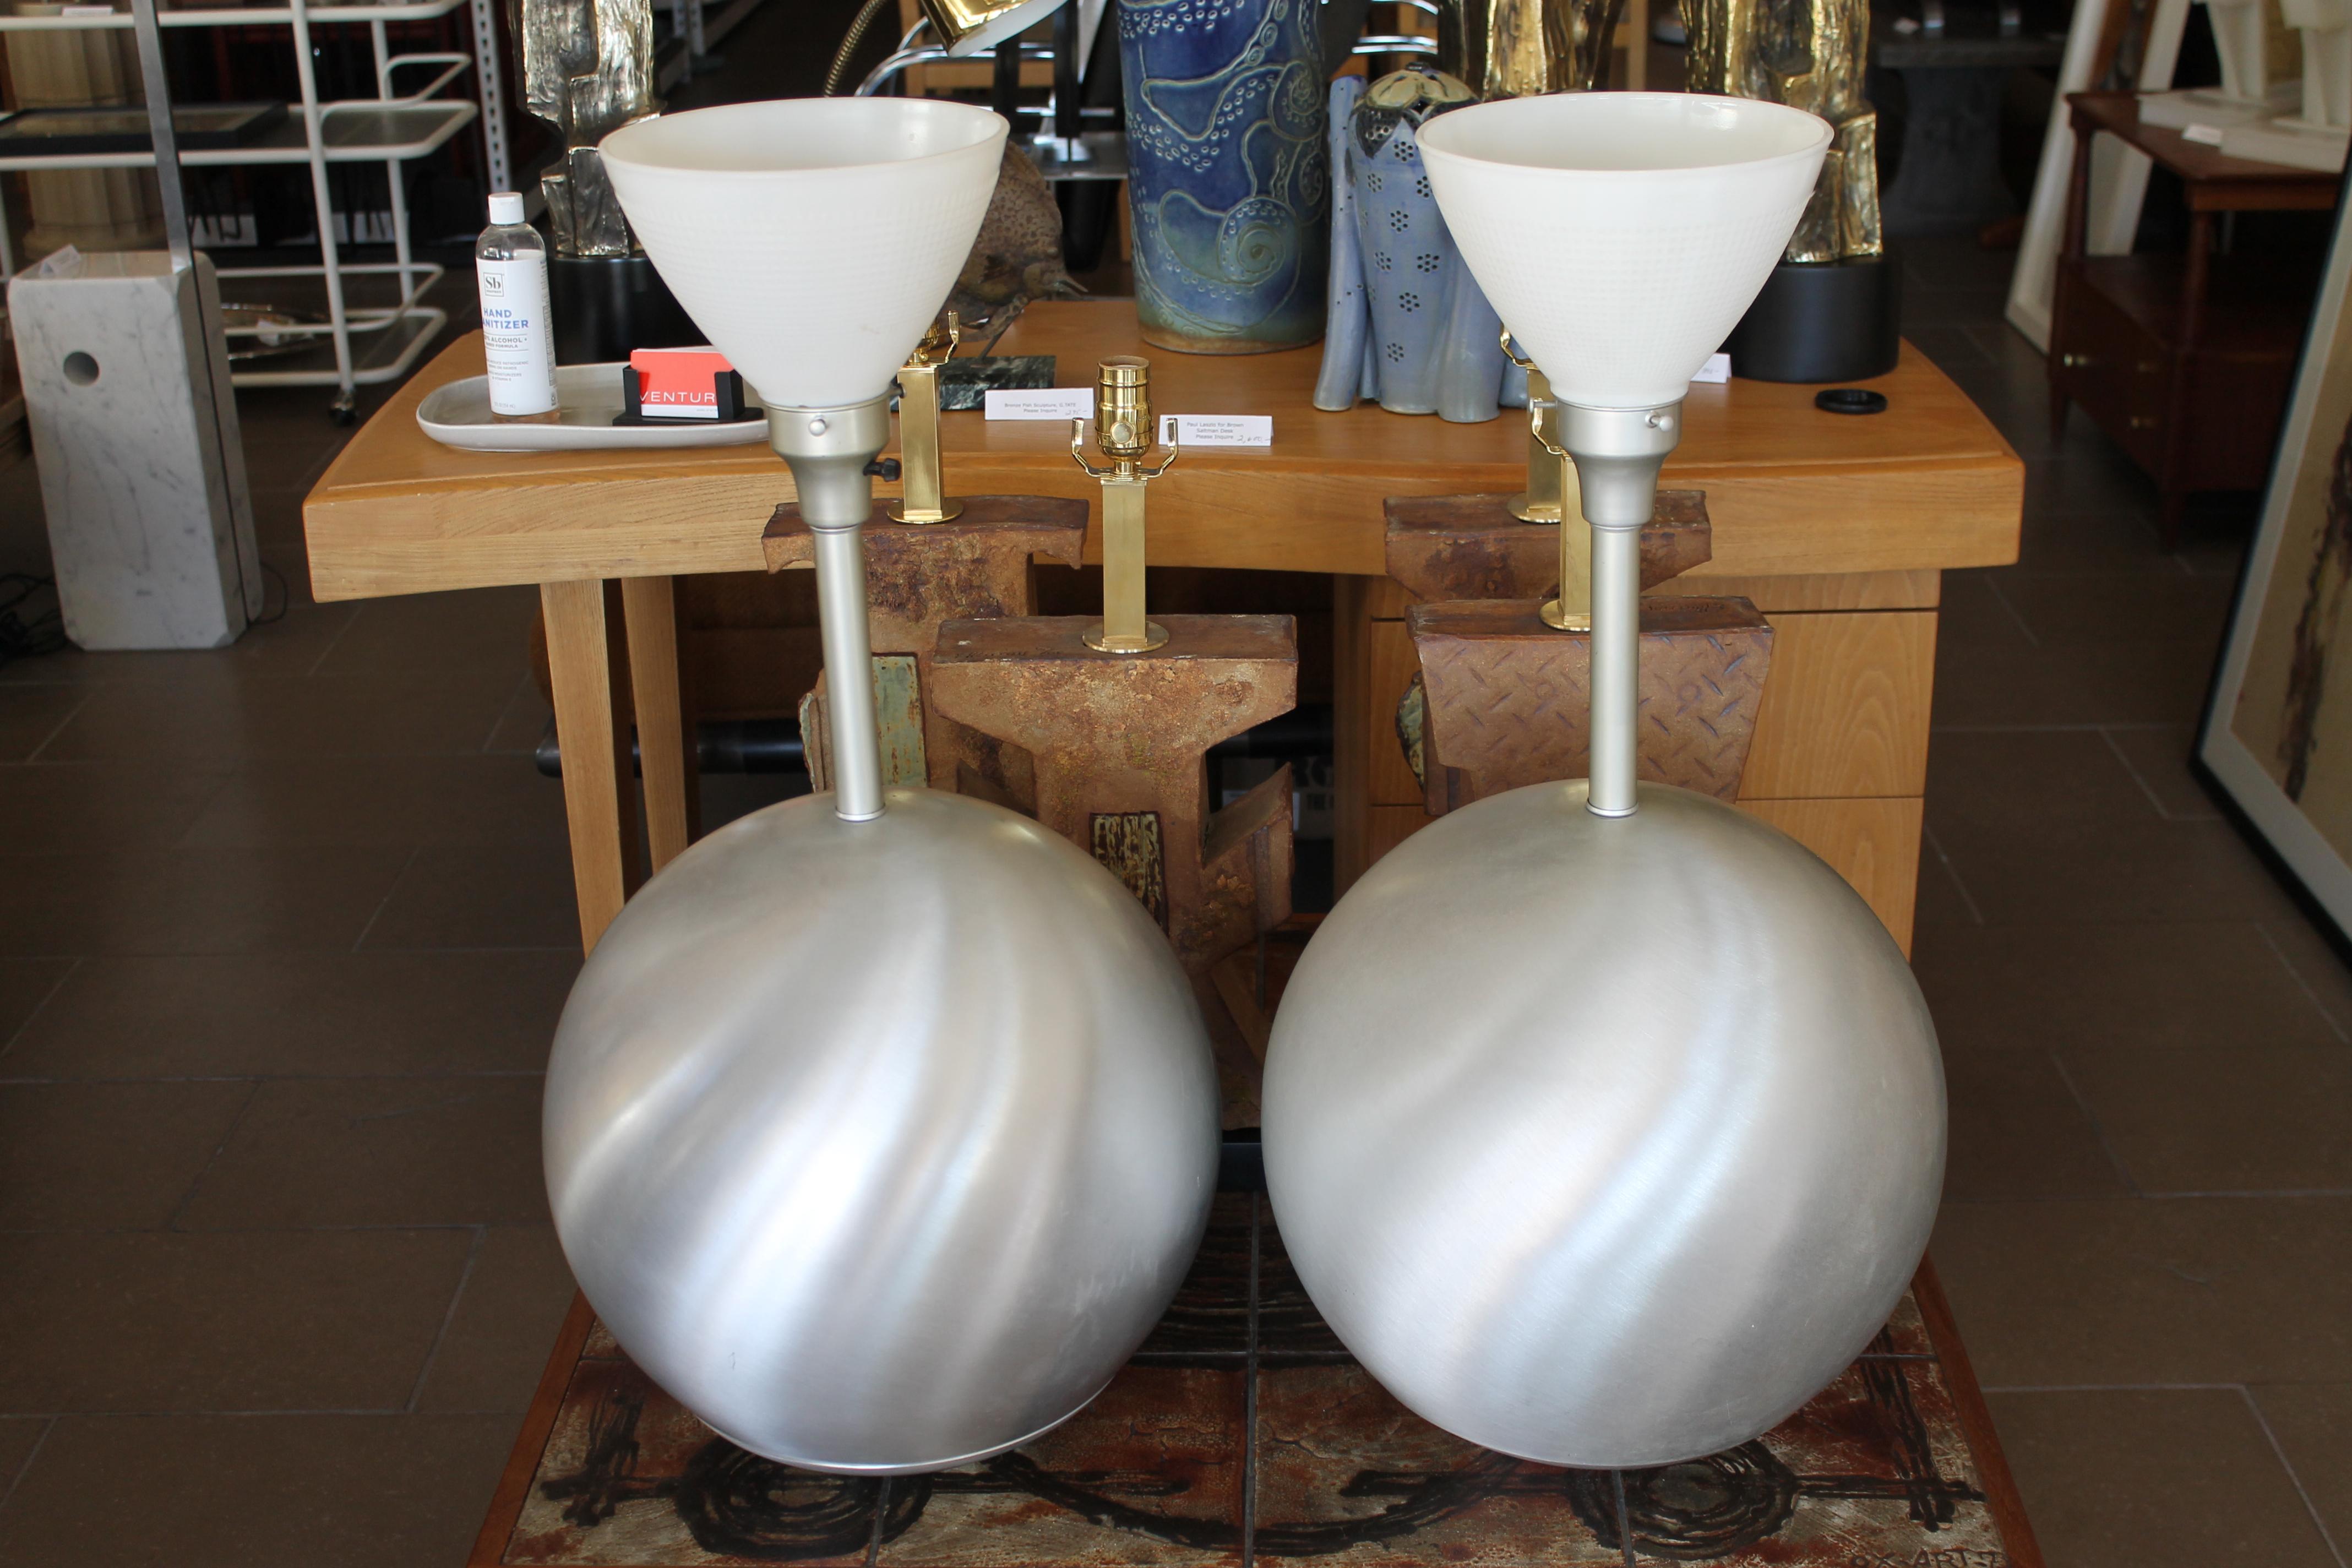 Pair of Raymor (Irving Richards) aluminum sphere lamps. We believe these were designed by Russel and Mary Wright and distributed/sold through Raymor. One of the lamps has a Raymor catchphrase label ‘Modern in the Tradition of Good Taste’. Lamps have